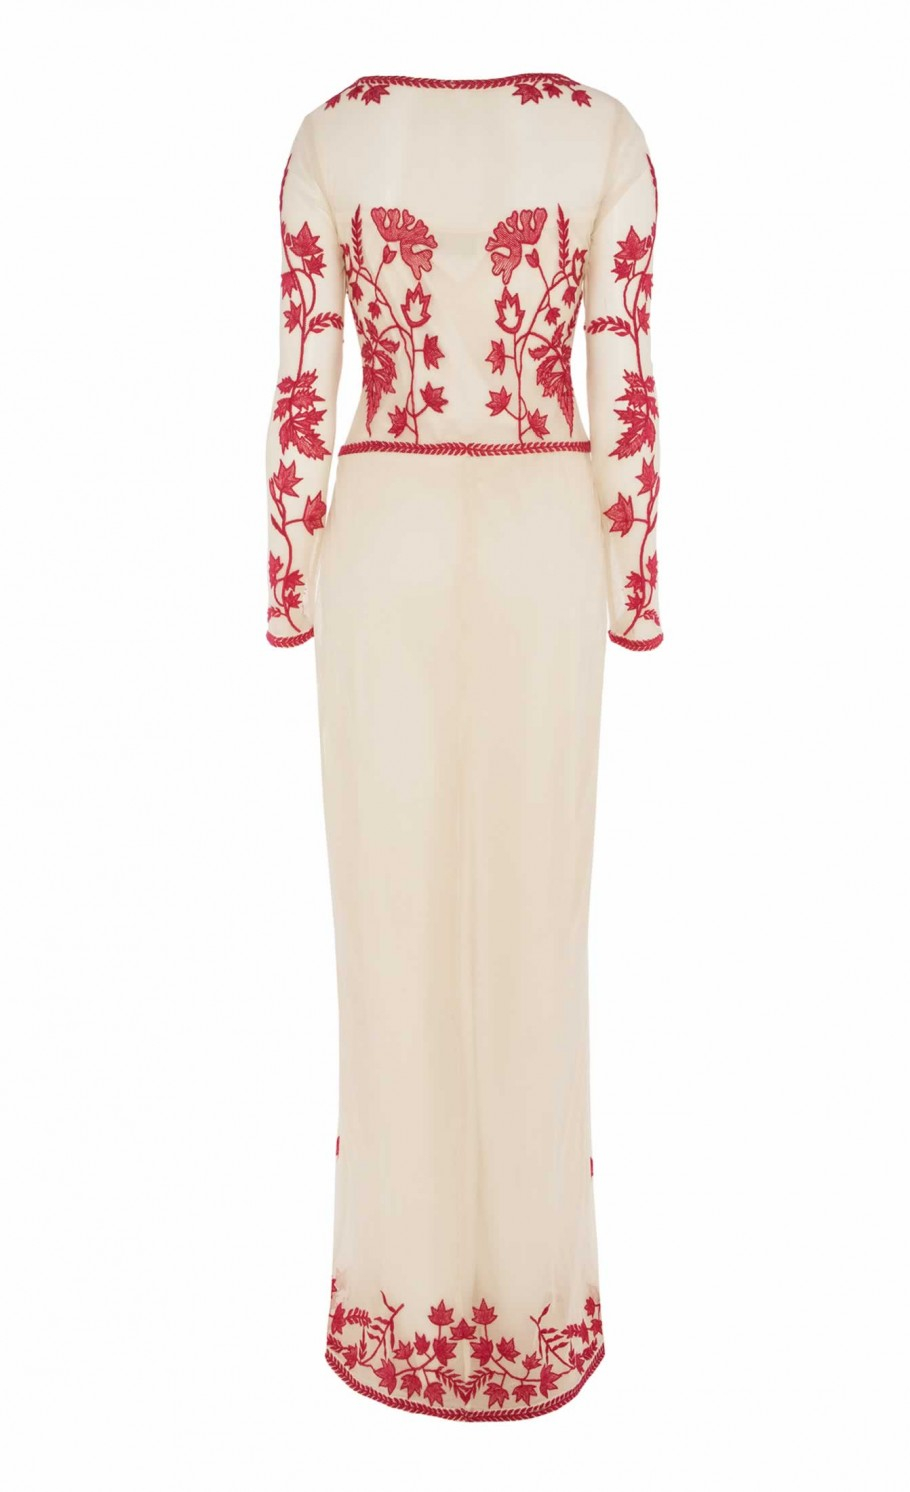 Lyst - Alice By Temperley Long Clover Dress in Red